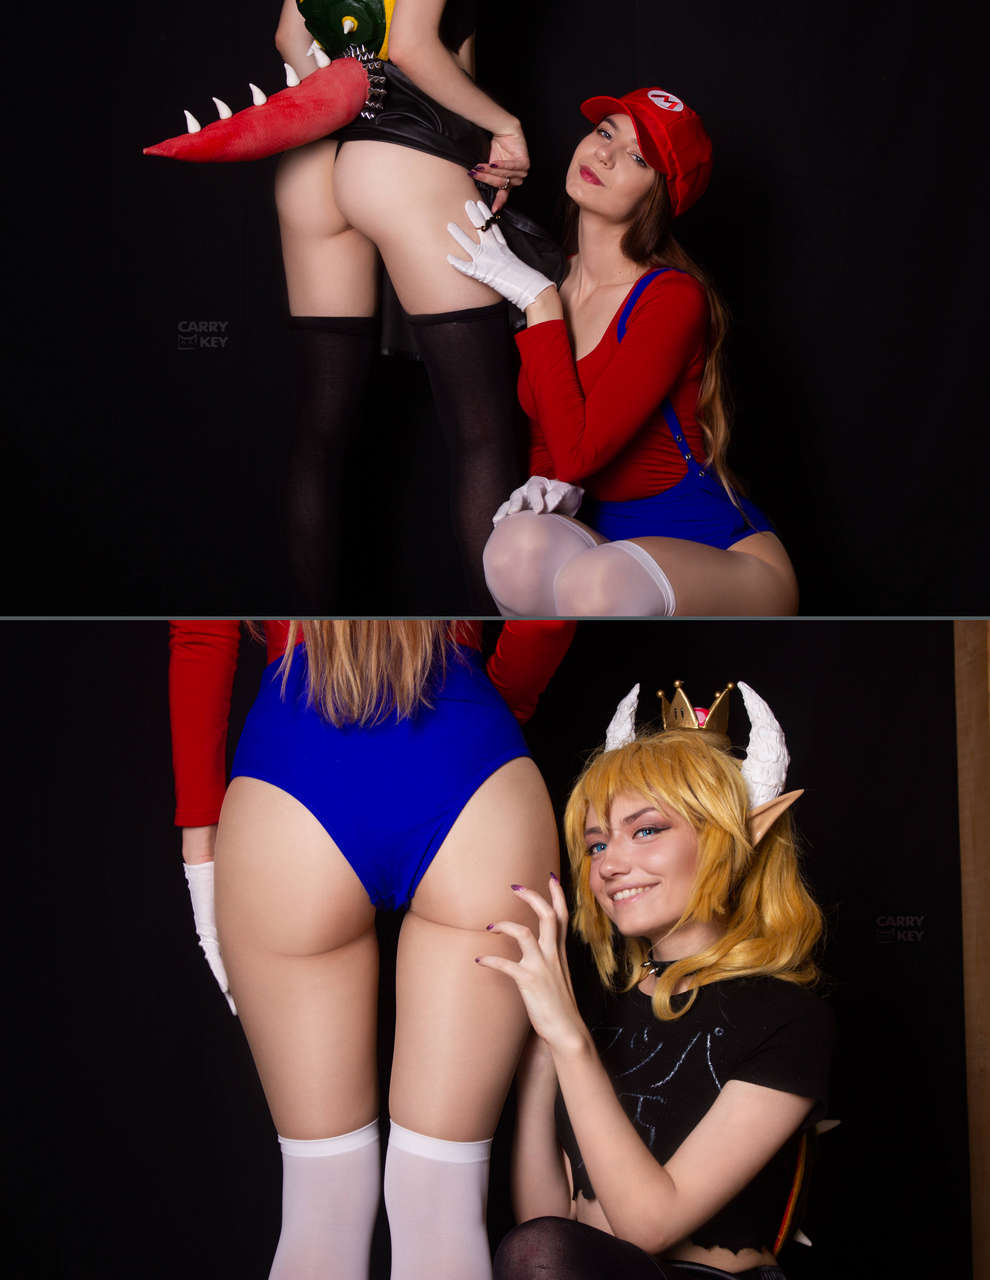 Carrykey As Bowsette And Silinarite As Lady Mari